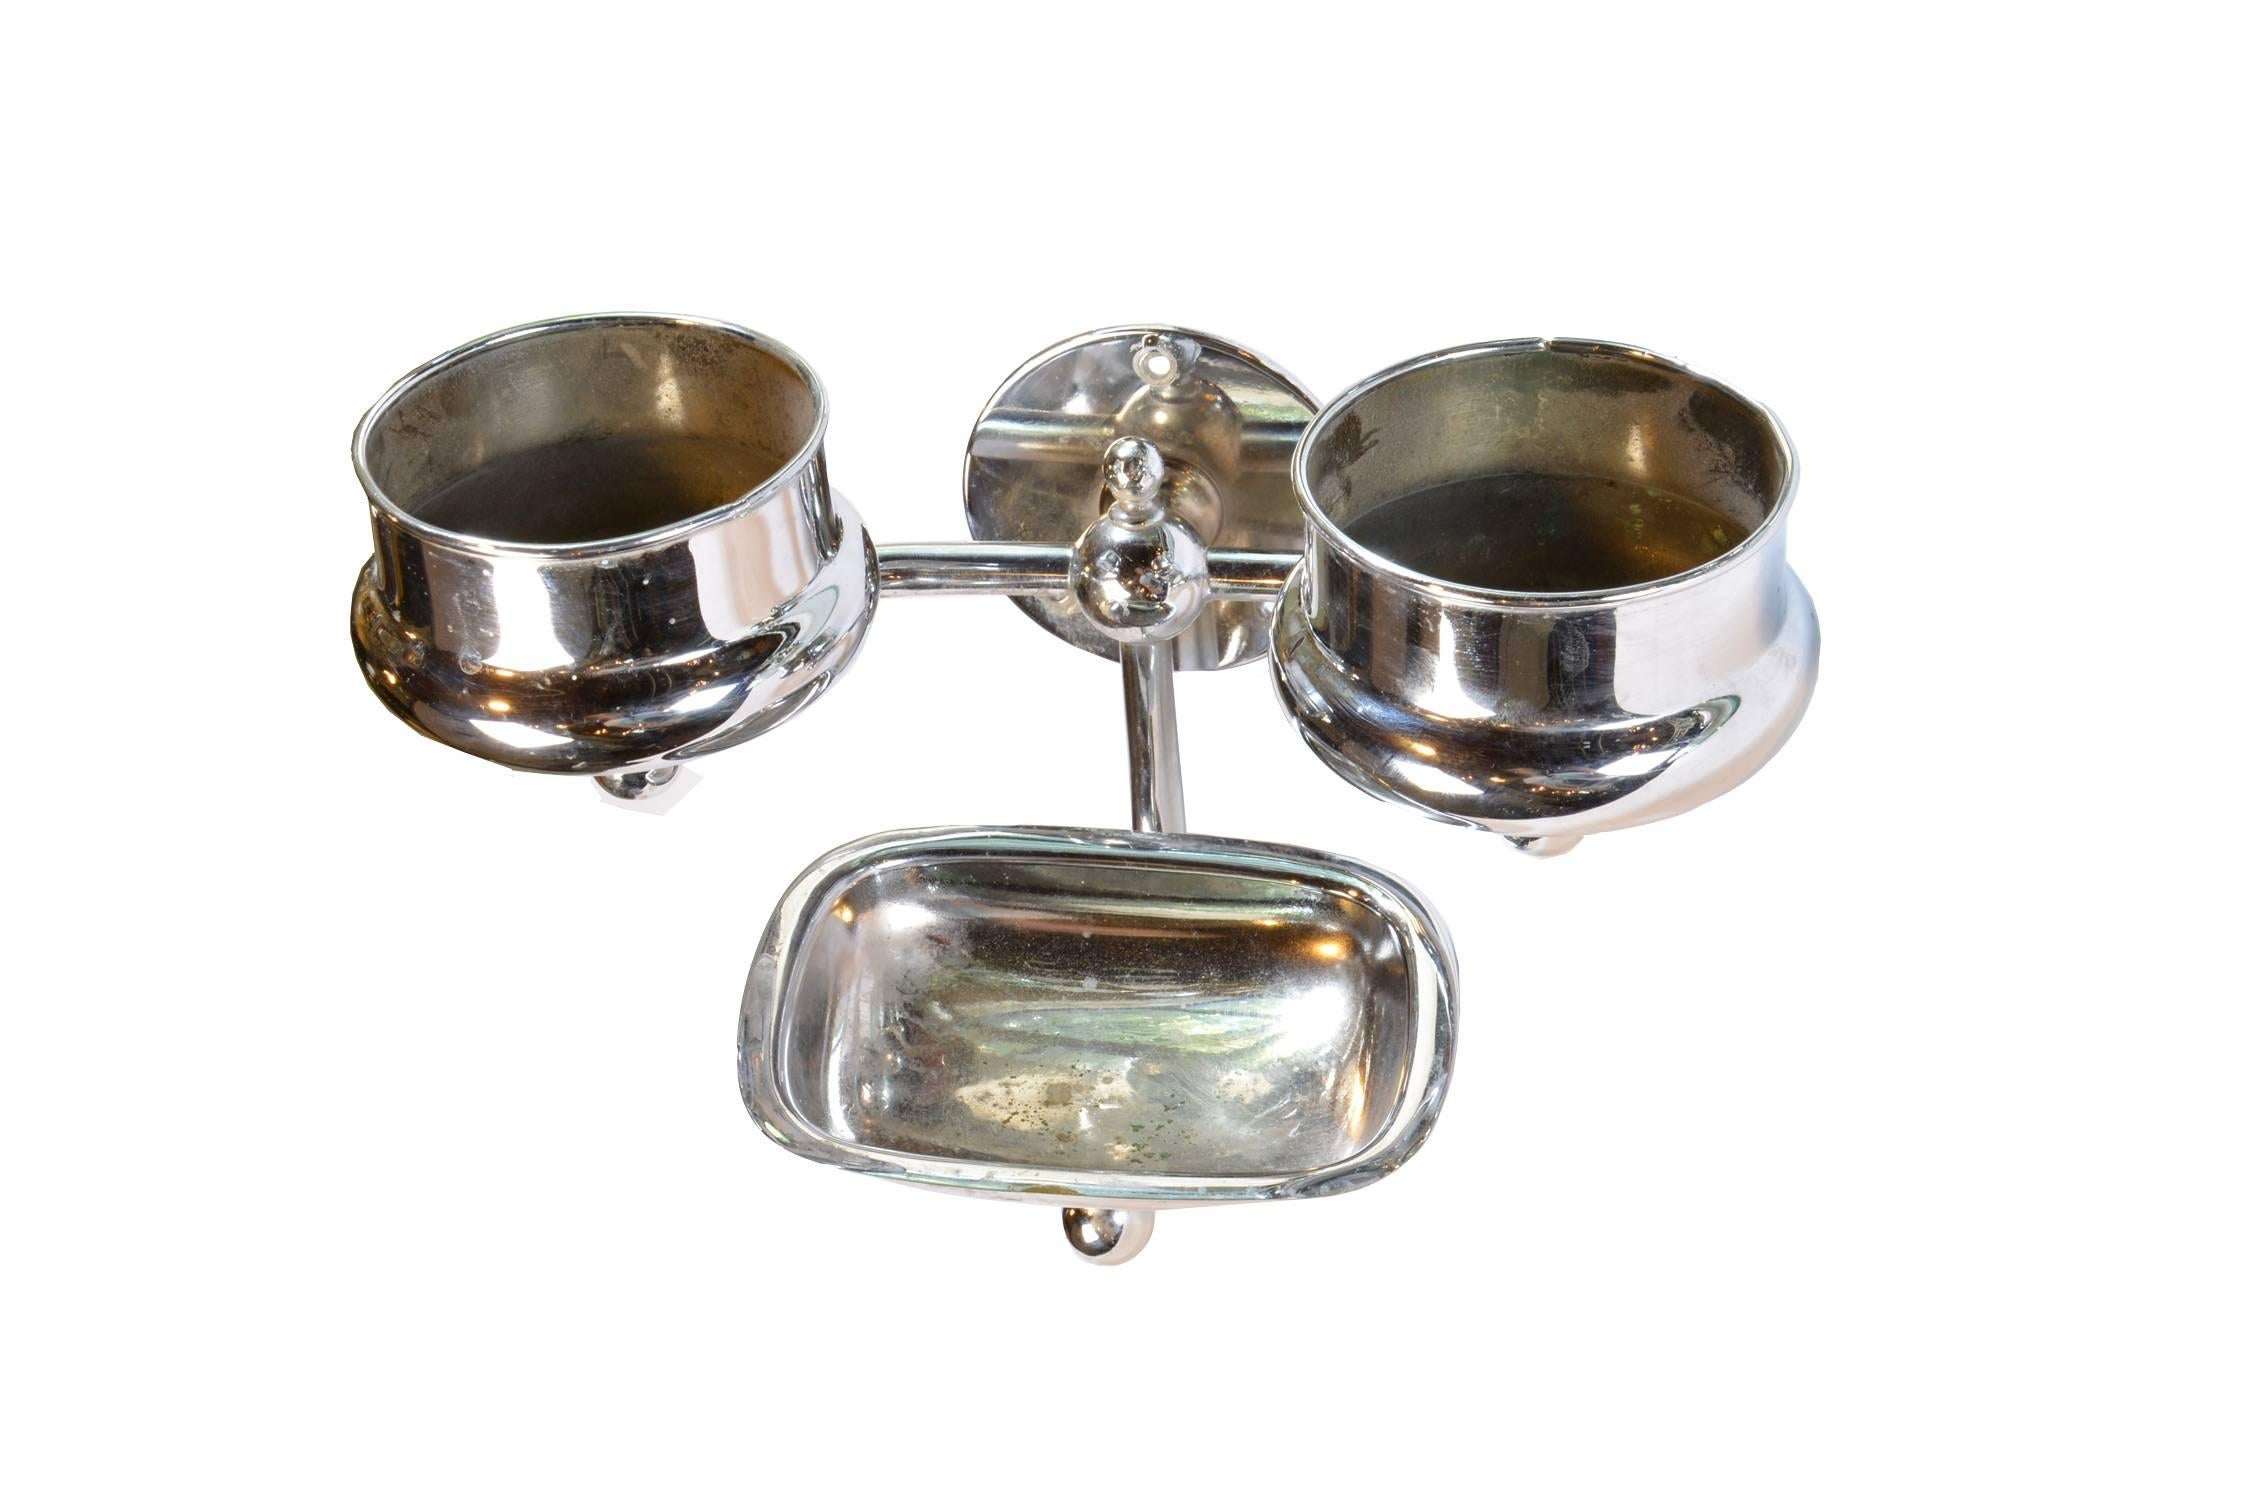 Gorgeous nickel cup holder with removable soap dish and toothbrush holder.